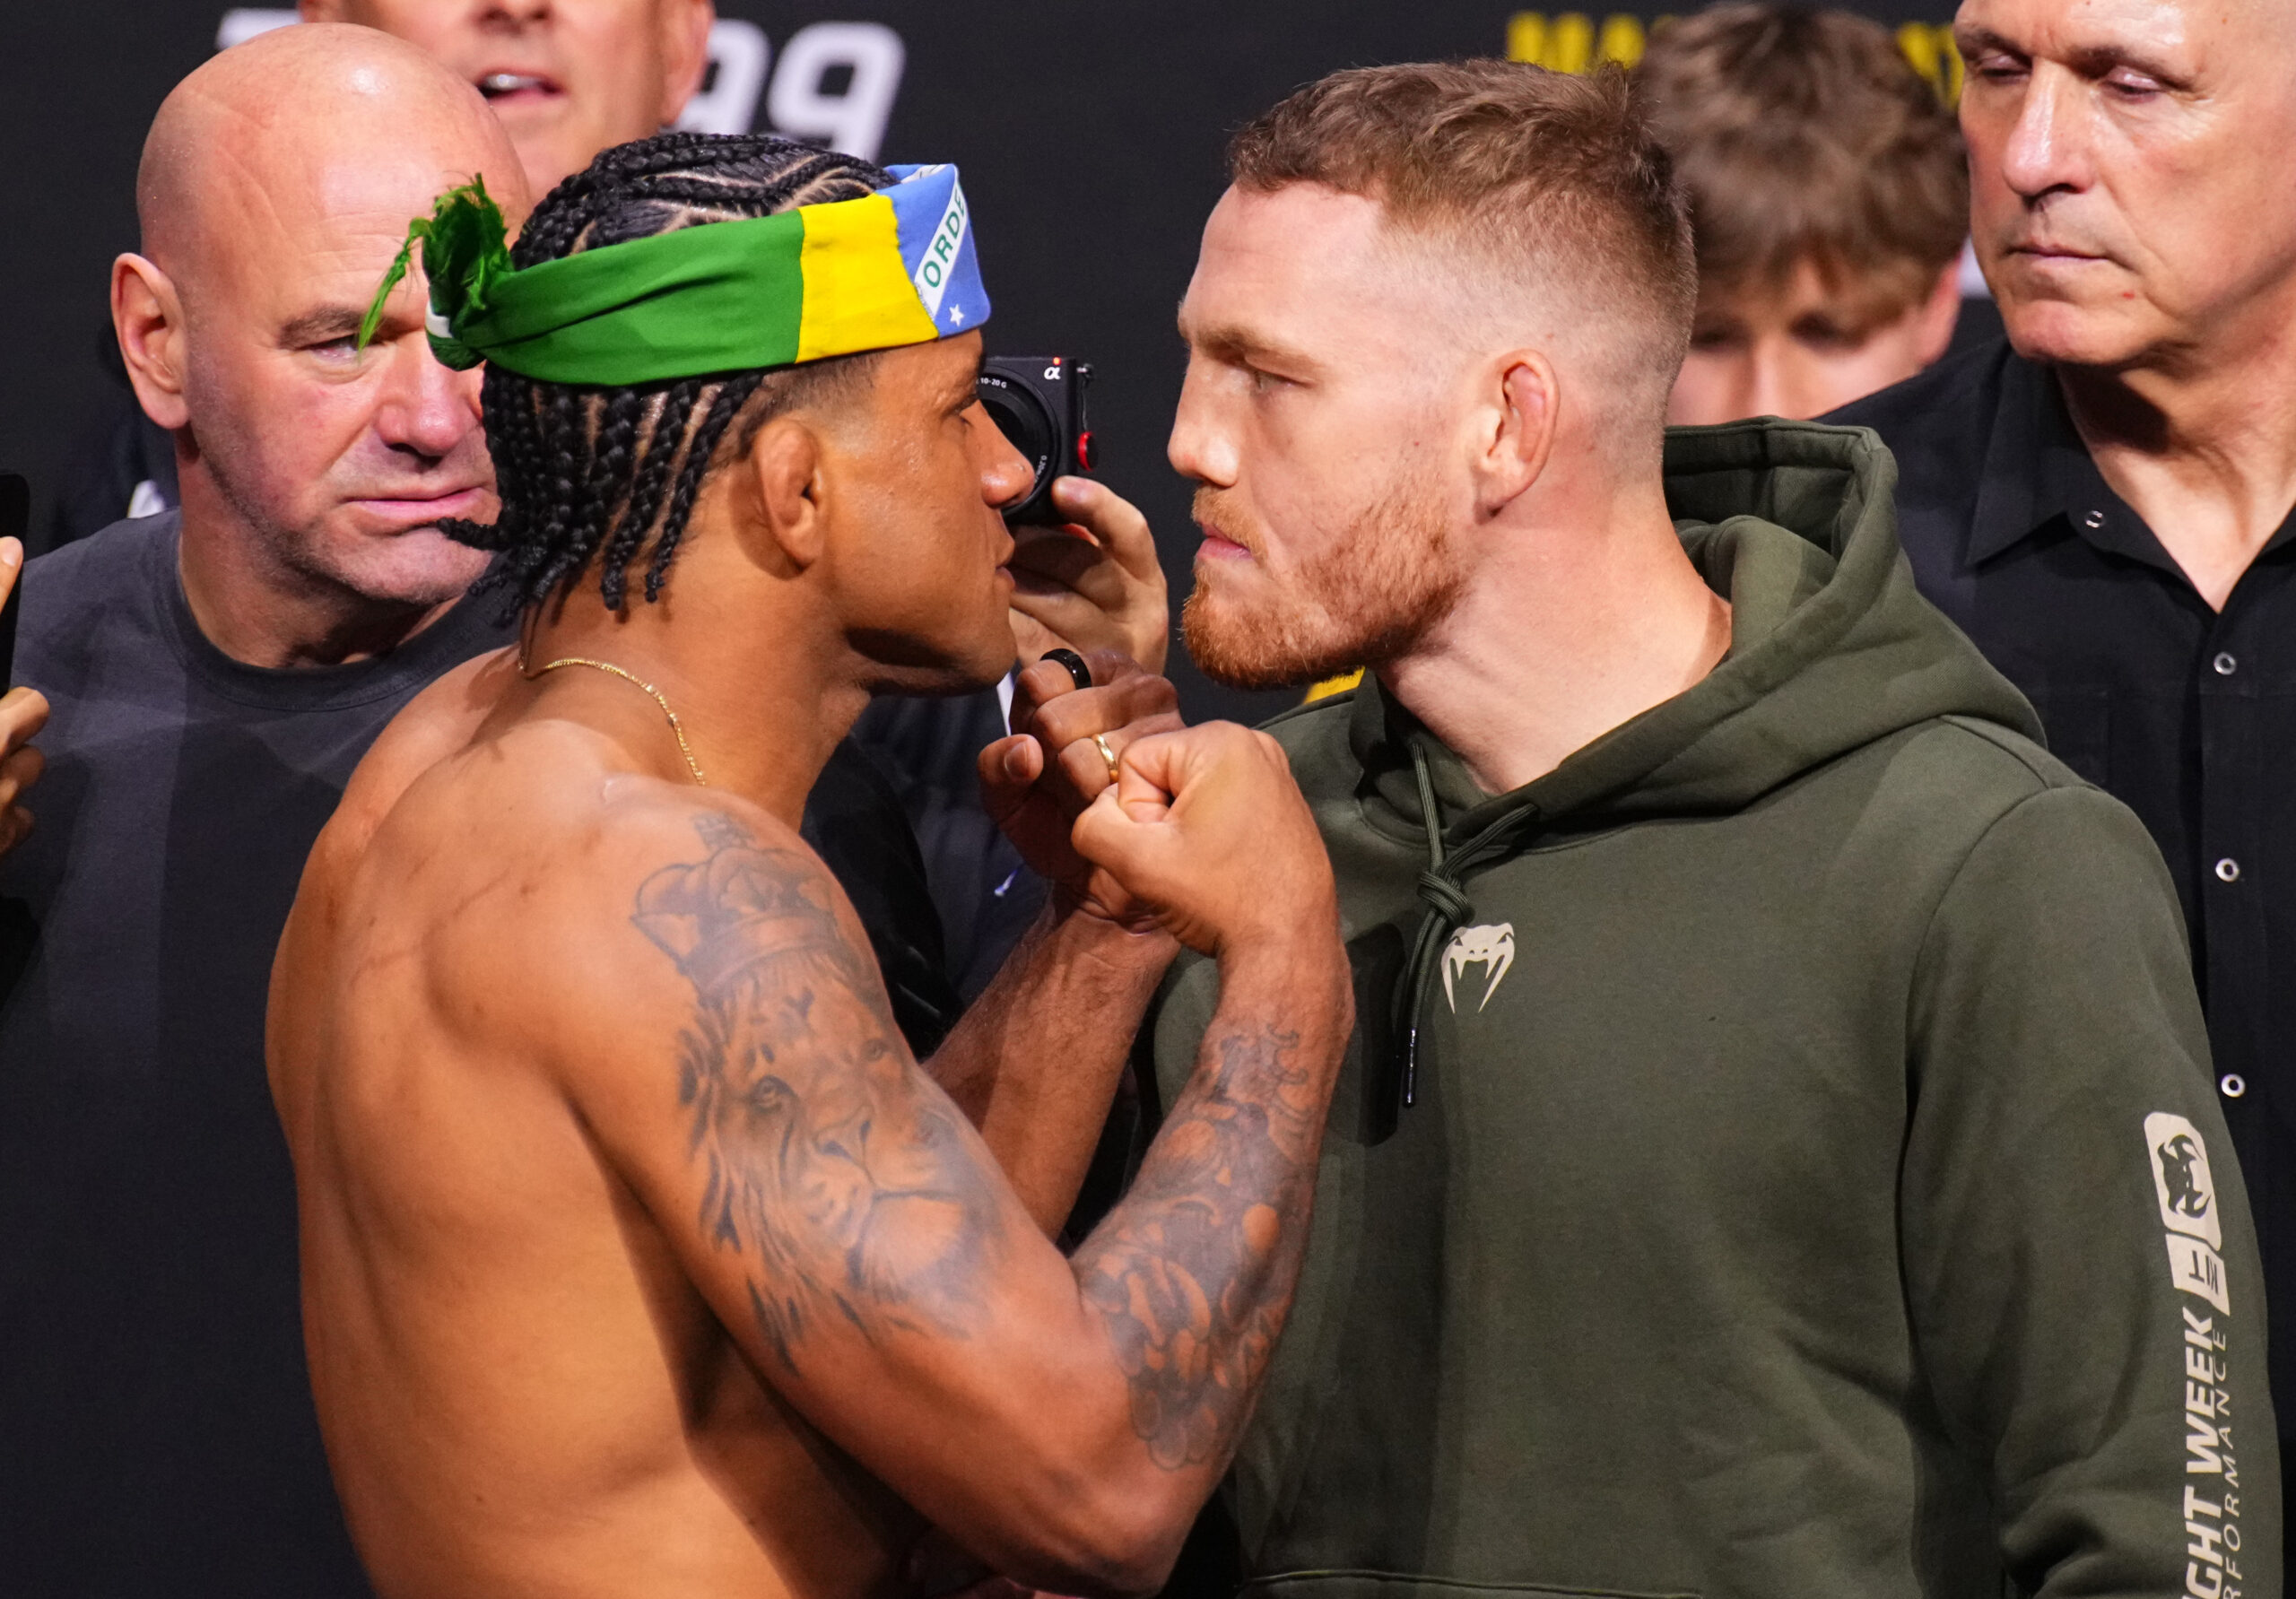 MIAMI, FLORIDA - MARCH 08: (L-R) Opponents Gilbert Burns of Brazil and Jack Della Maddalena of Australia face off during the UFC 299 ceremonial weigh-in at Kaseya Center on March 08, 2024 in Miami, Florida. (Photo by Chris Unger/Zuffa LLC via Getty Images)